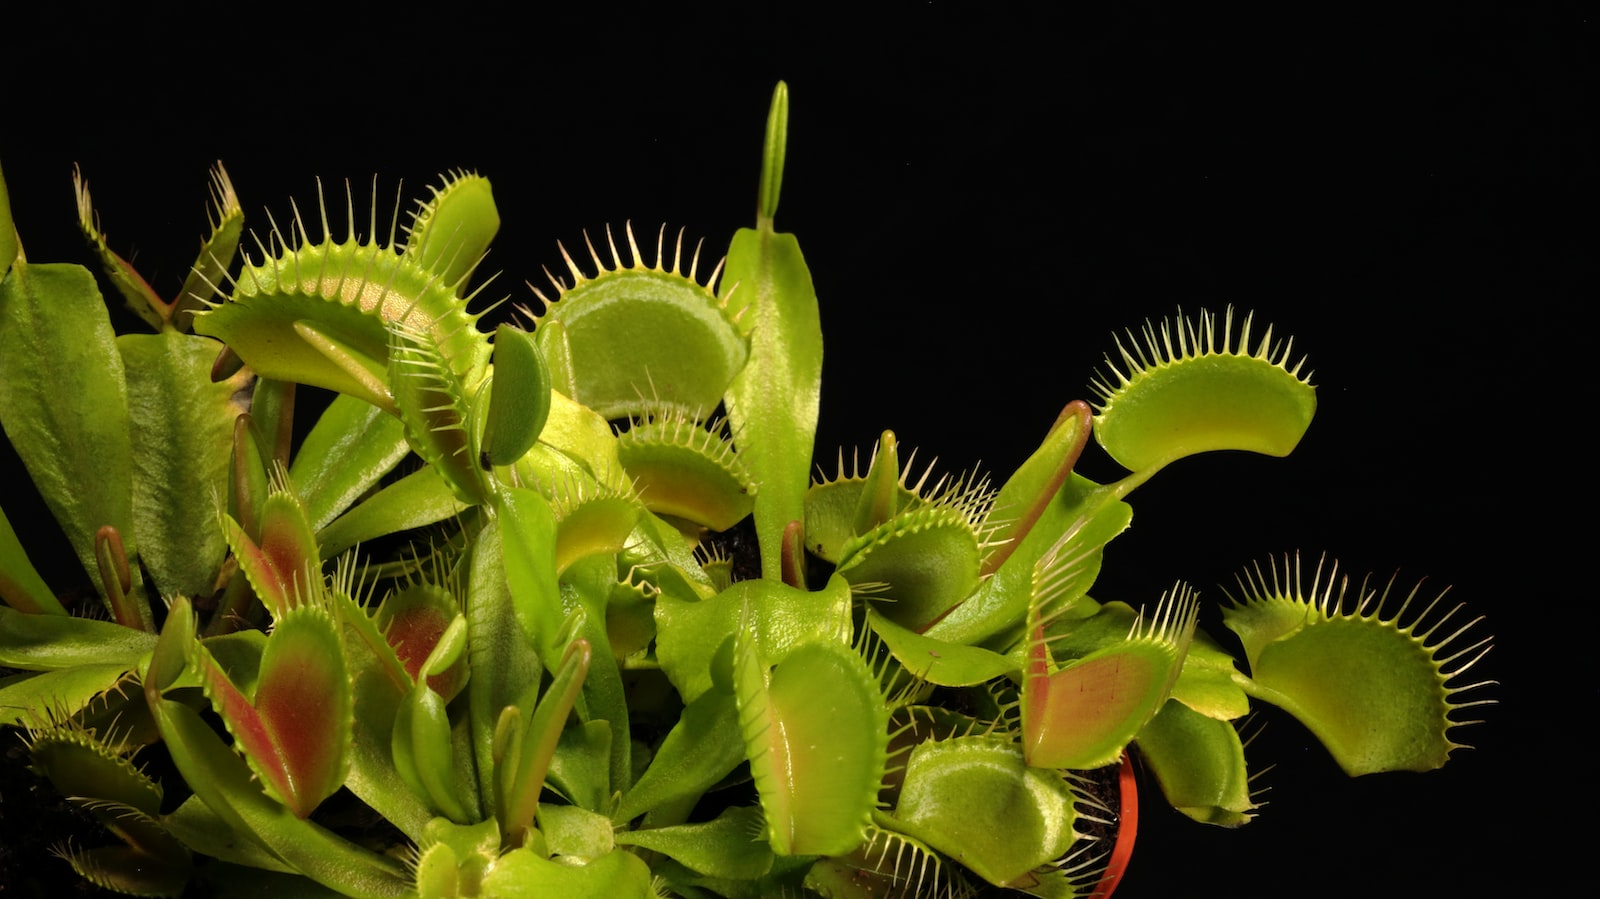 Water your venus fly trap